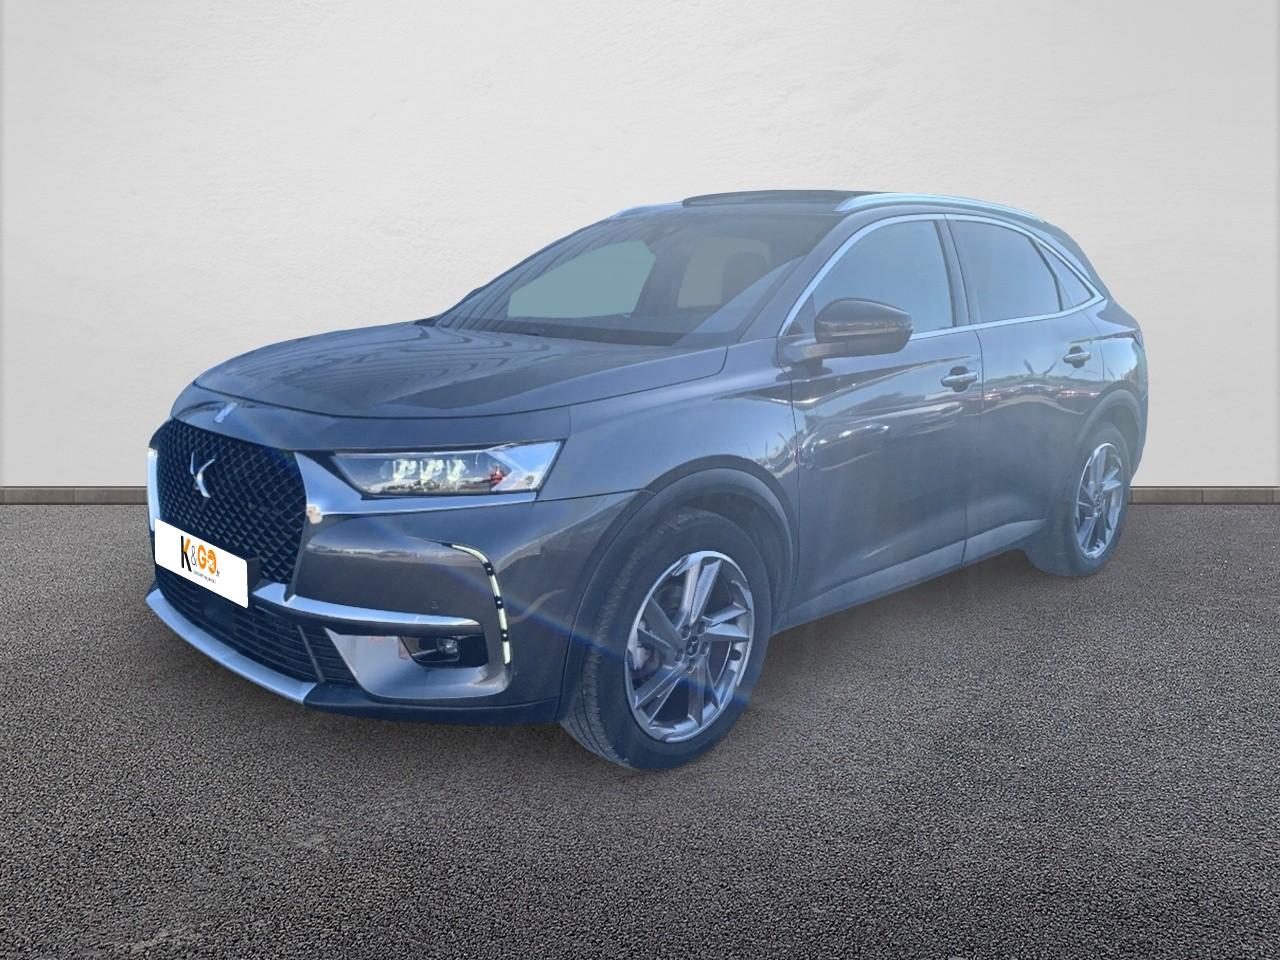 Ds-Ds7 crossback-Bluehdi 130 eat8 opera